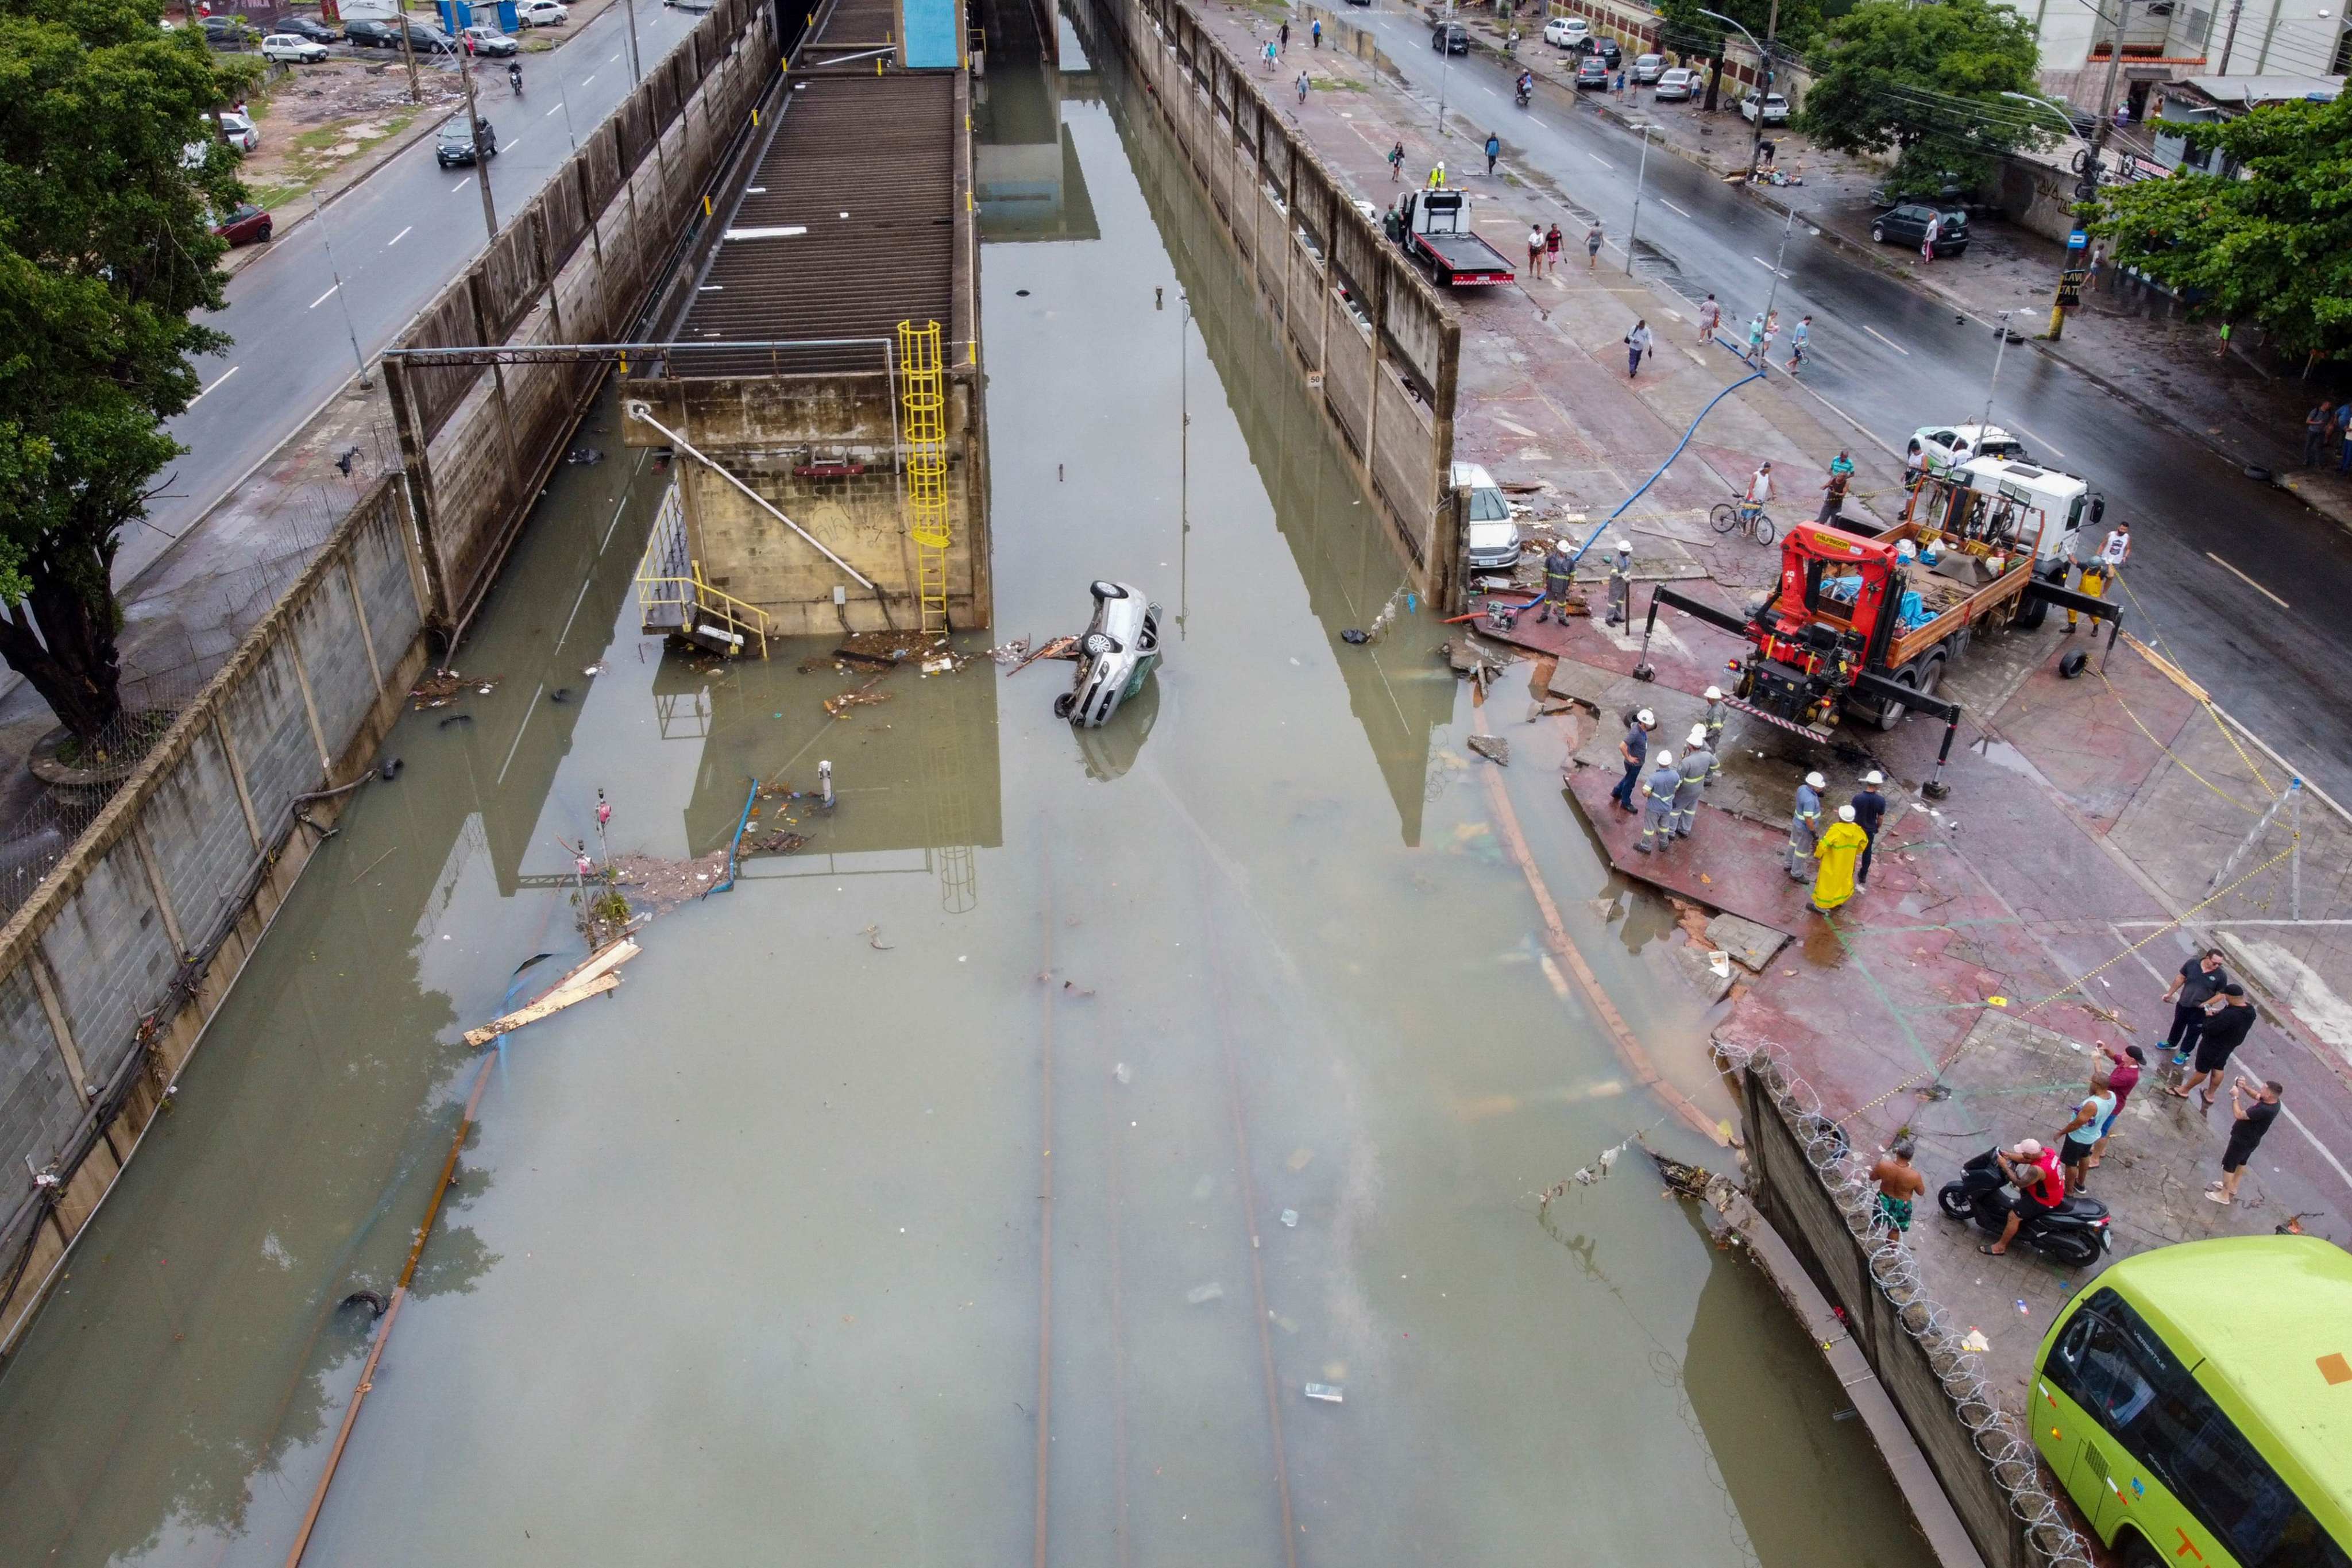 People look at a car that was swept into the flooded railways of the Acari metro station after heavy rains caused destruction in the suburbs of Rio de Janeiro, Brazil on Sunday. Photo: AFP